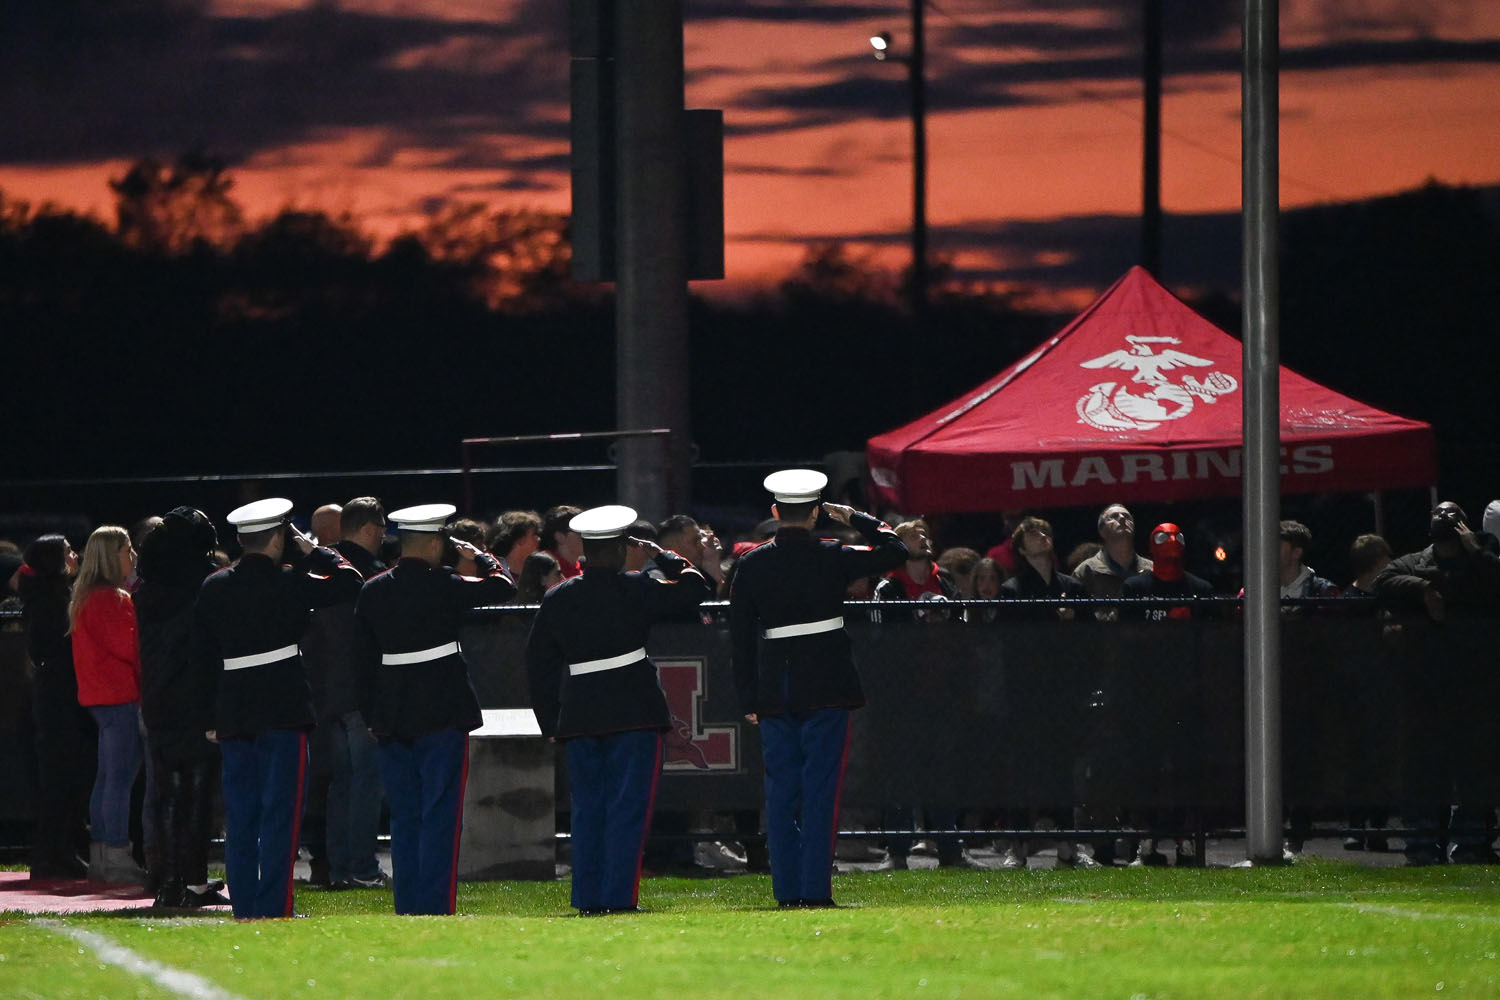 Marines saluting the flag during the National Anthem